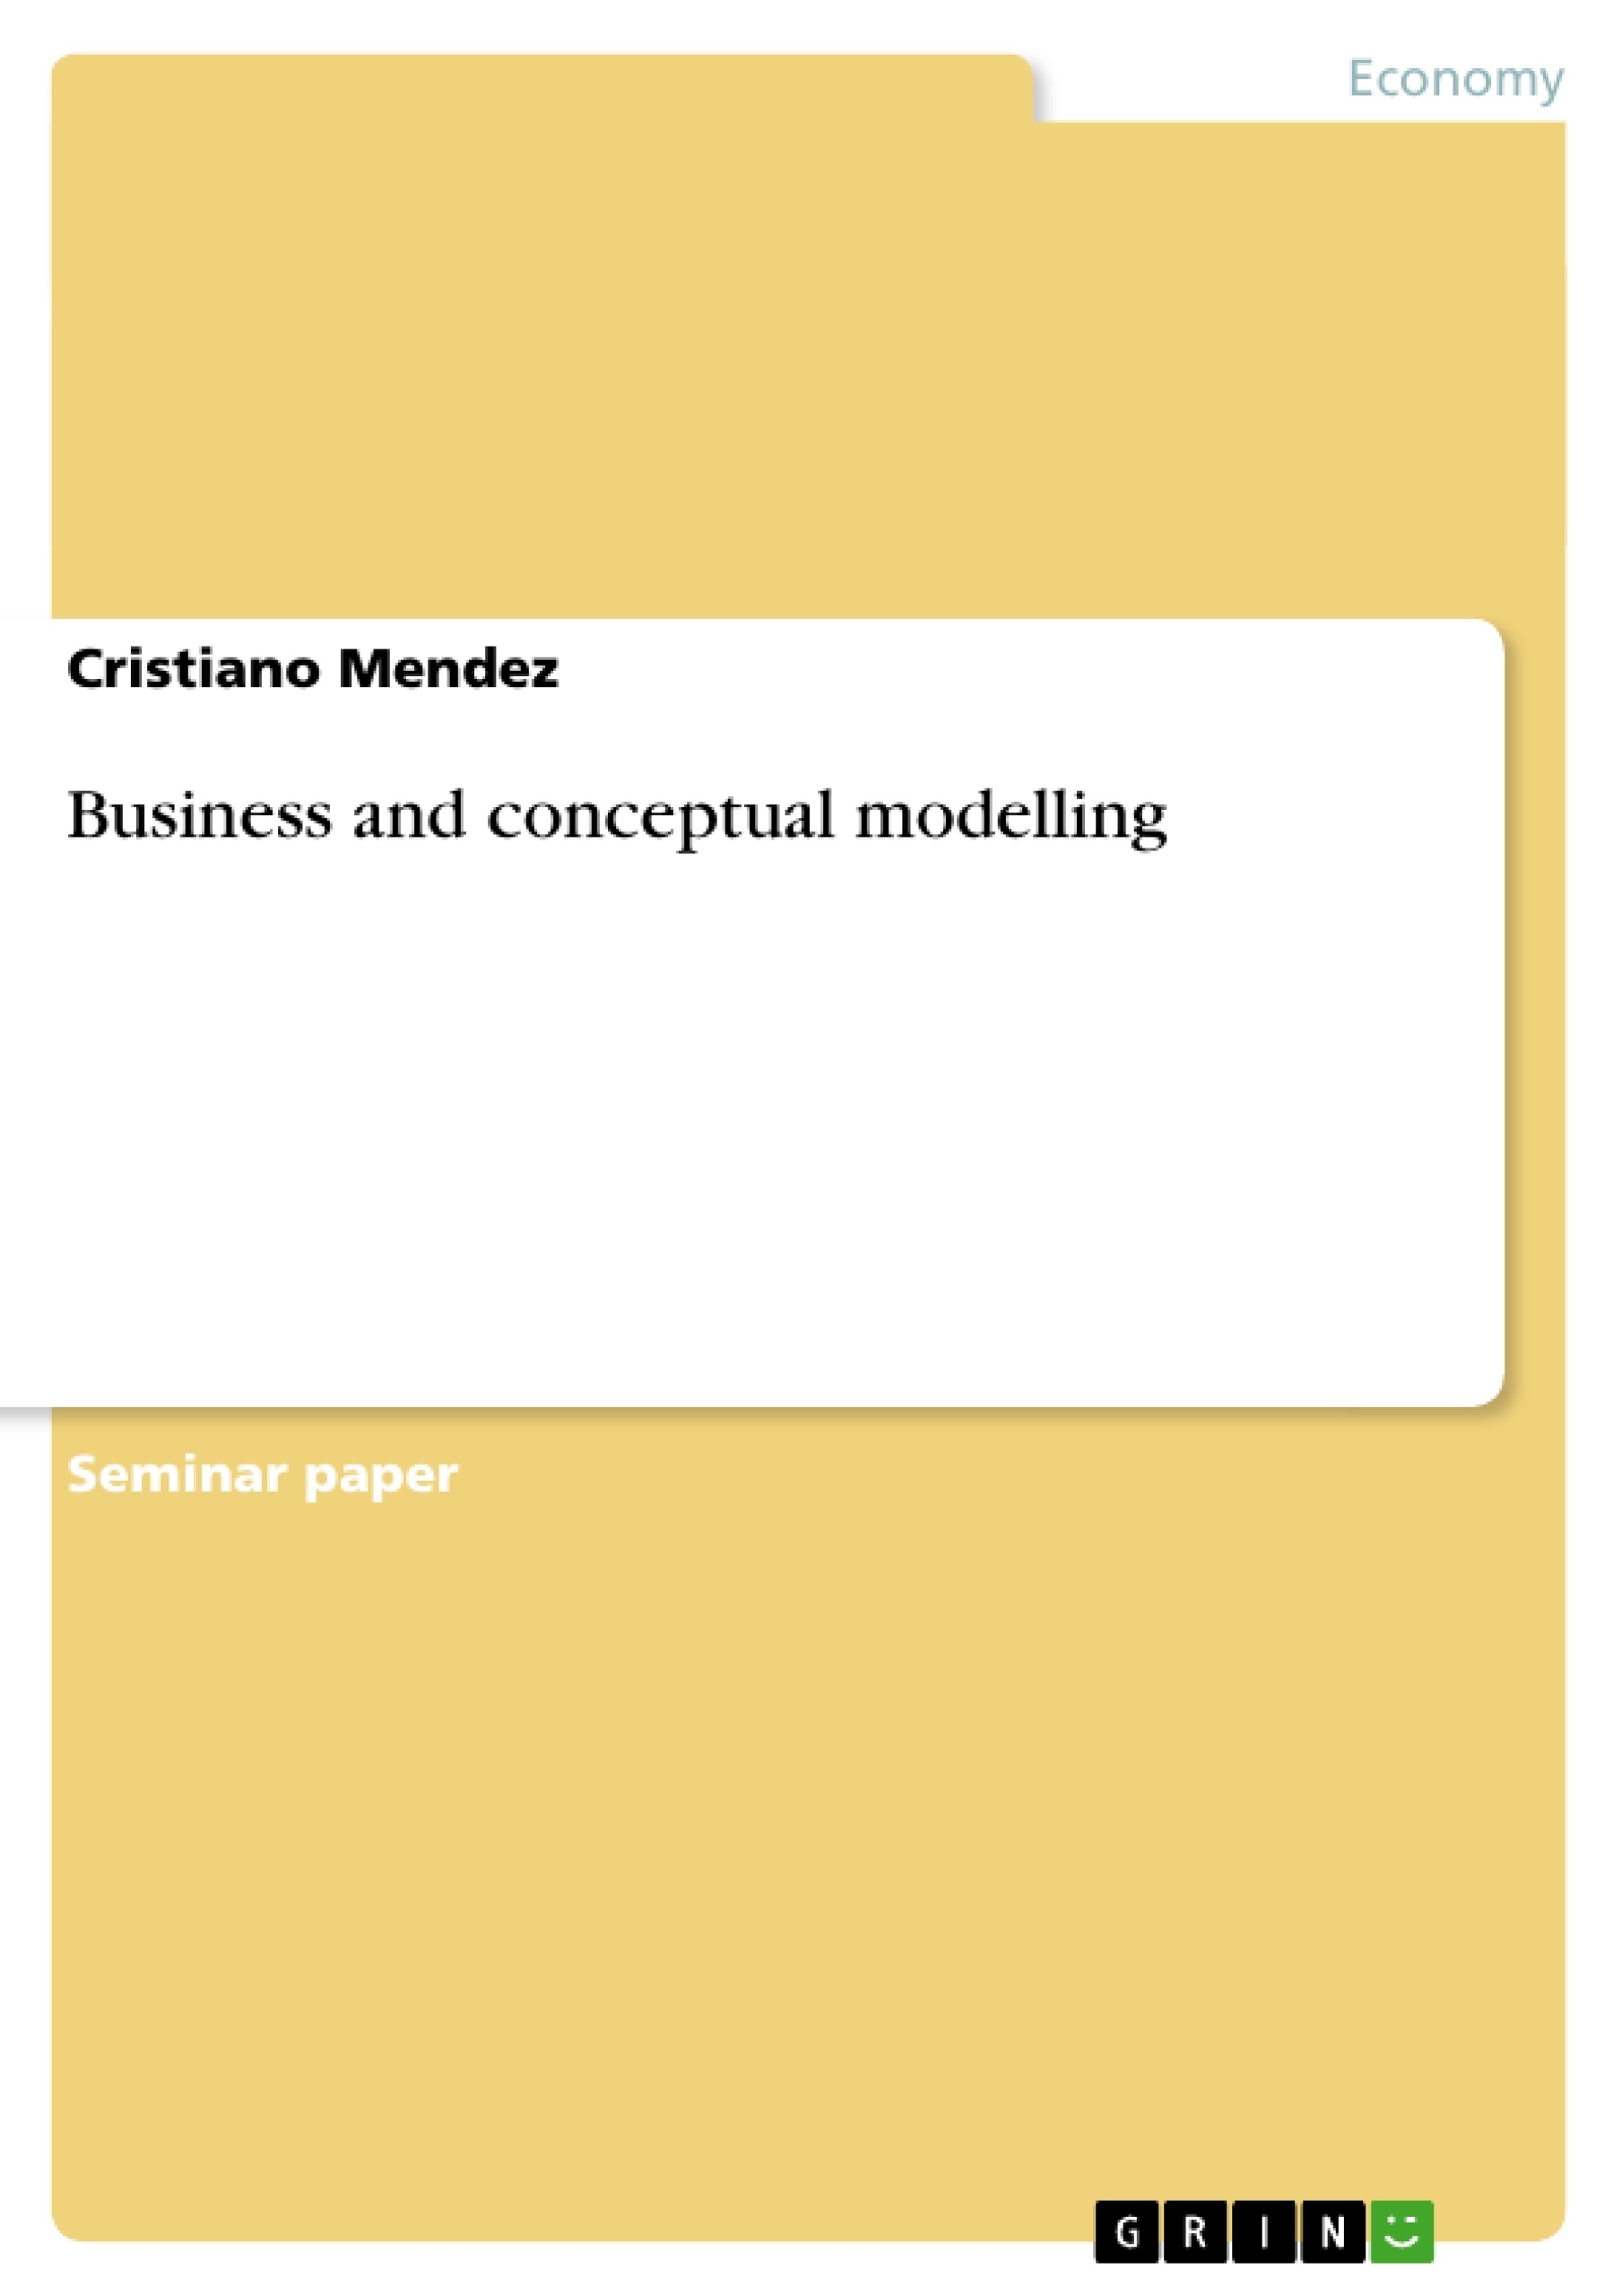 Title: Business and conceptual modelling